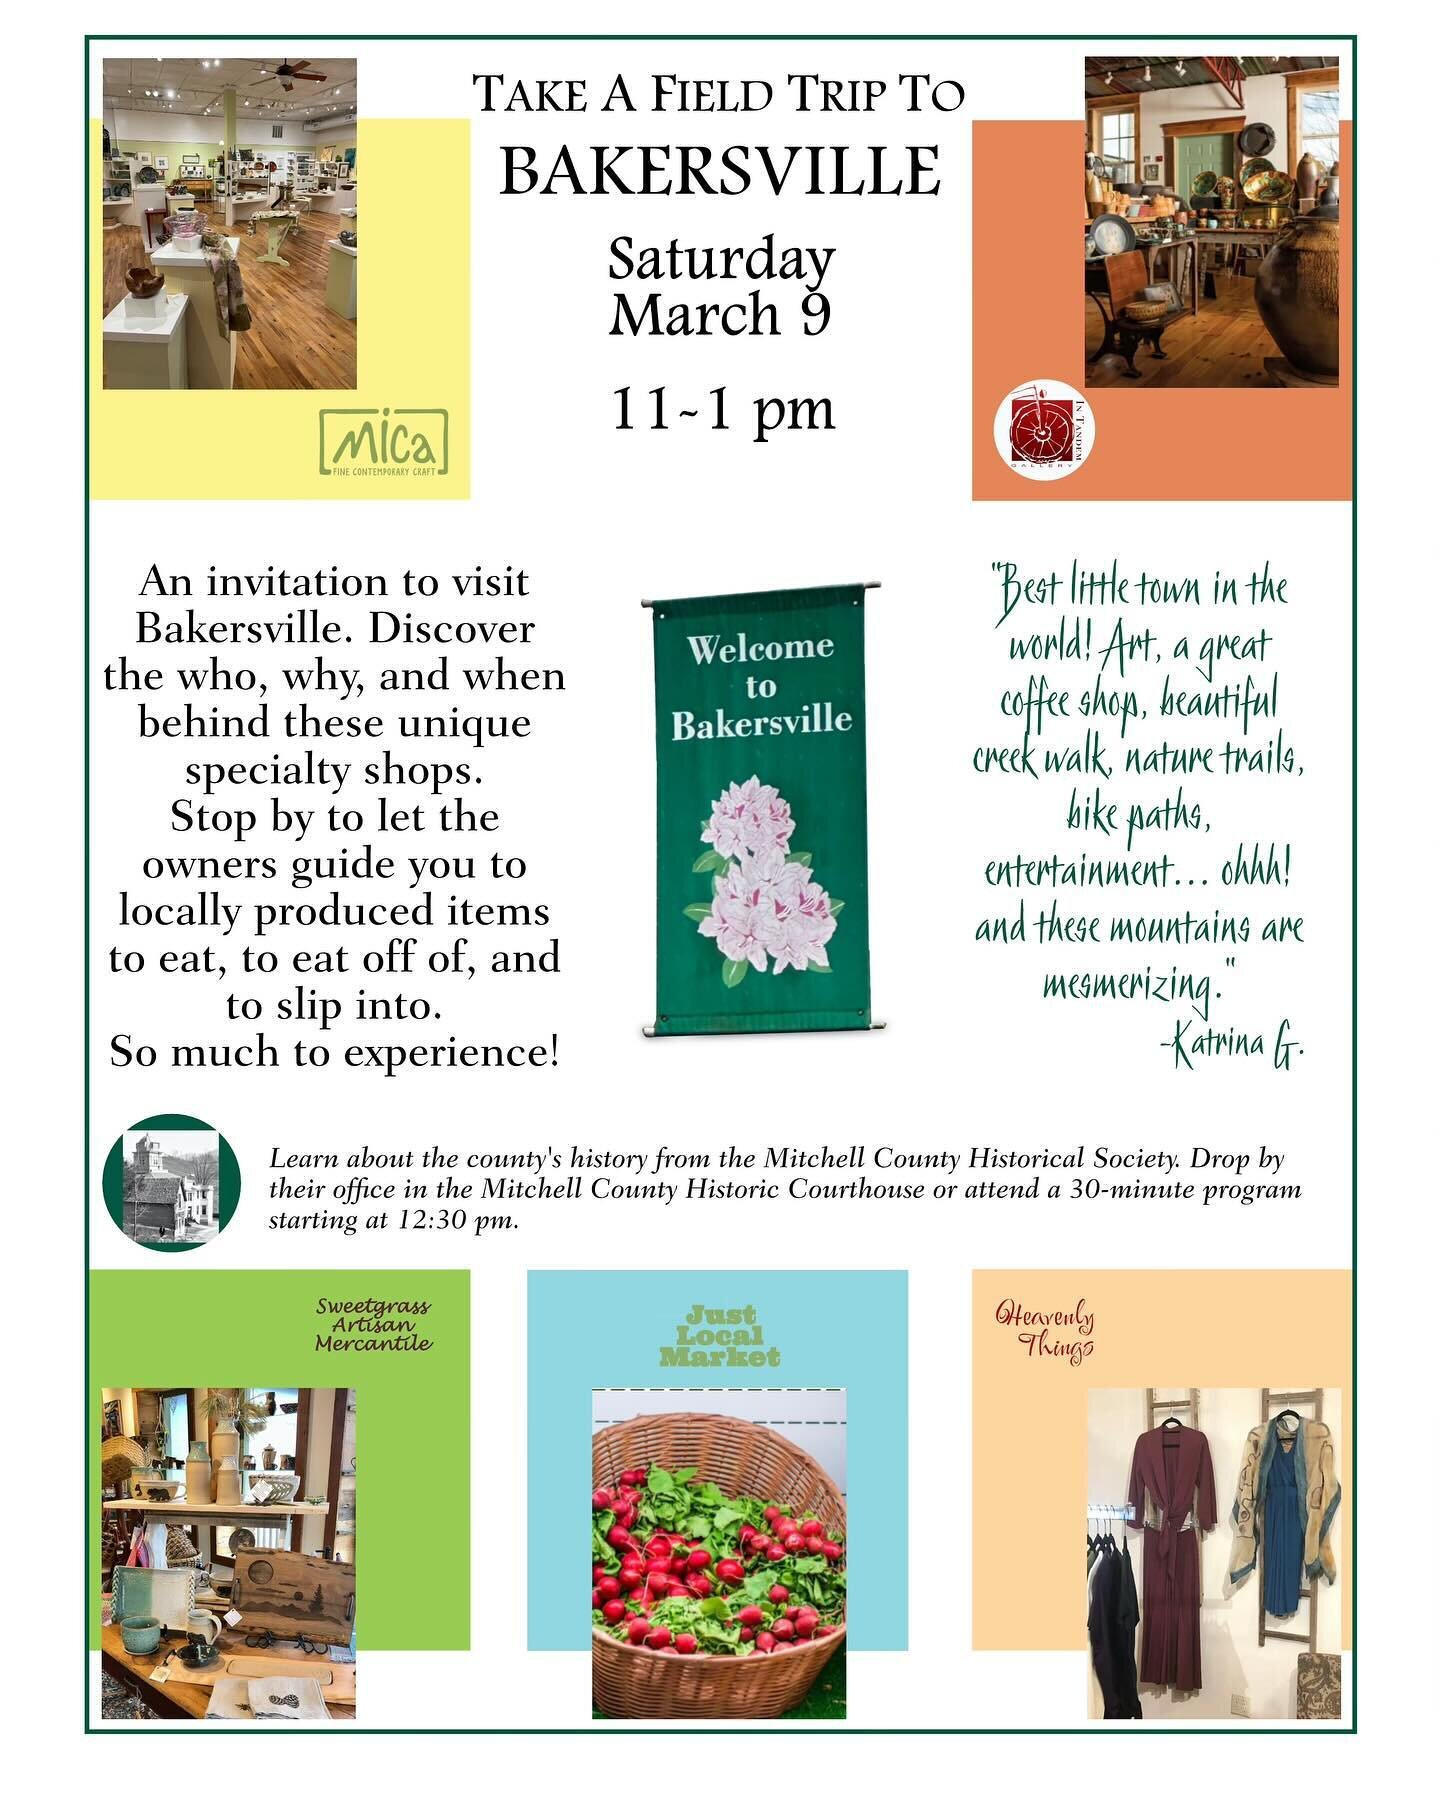 This Saturday in Bakersville. Come see the treasures of our little town.